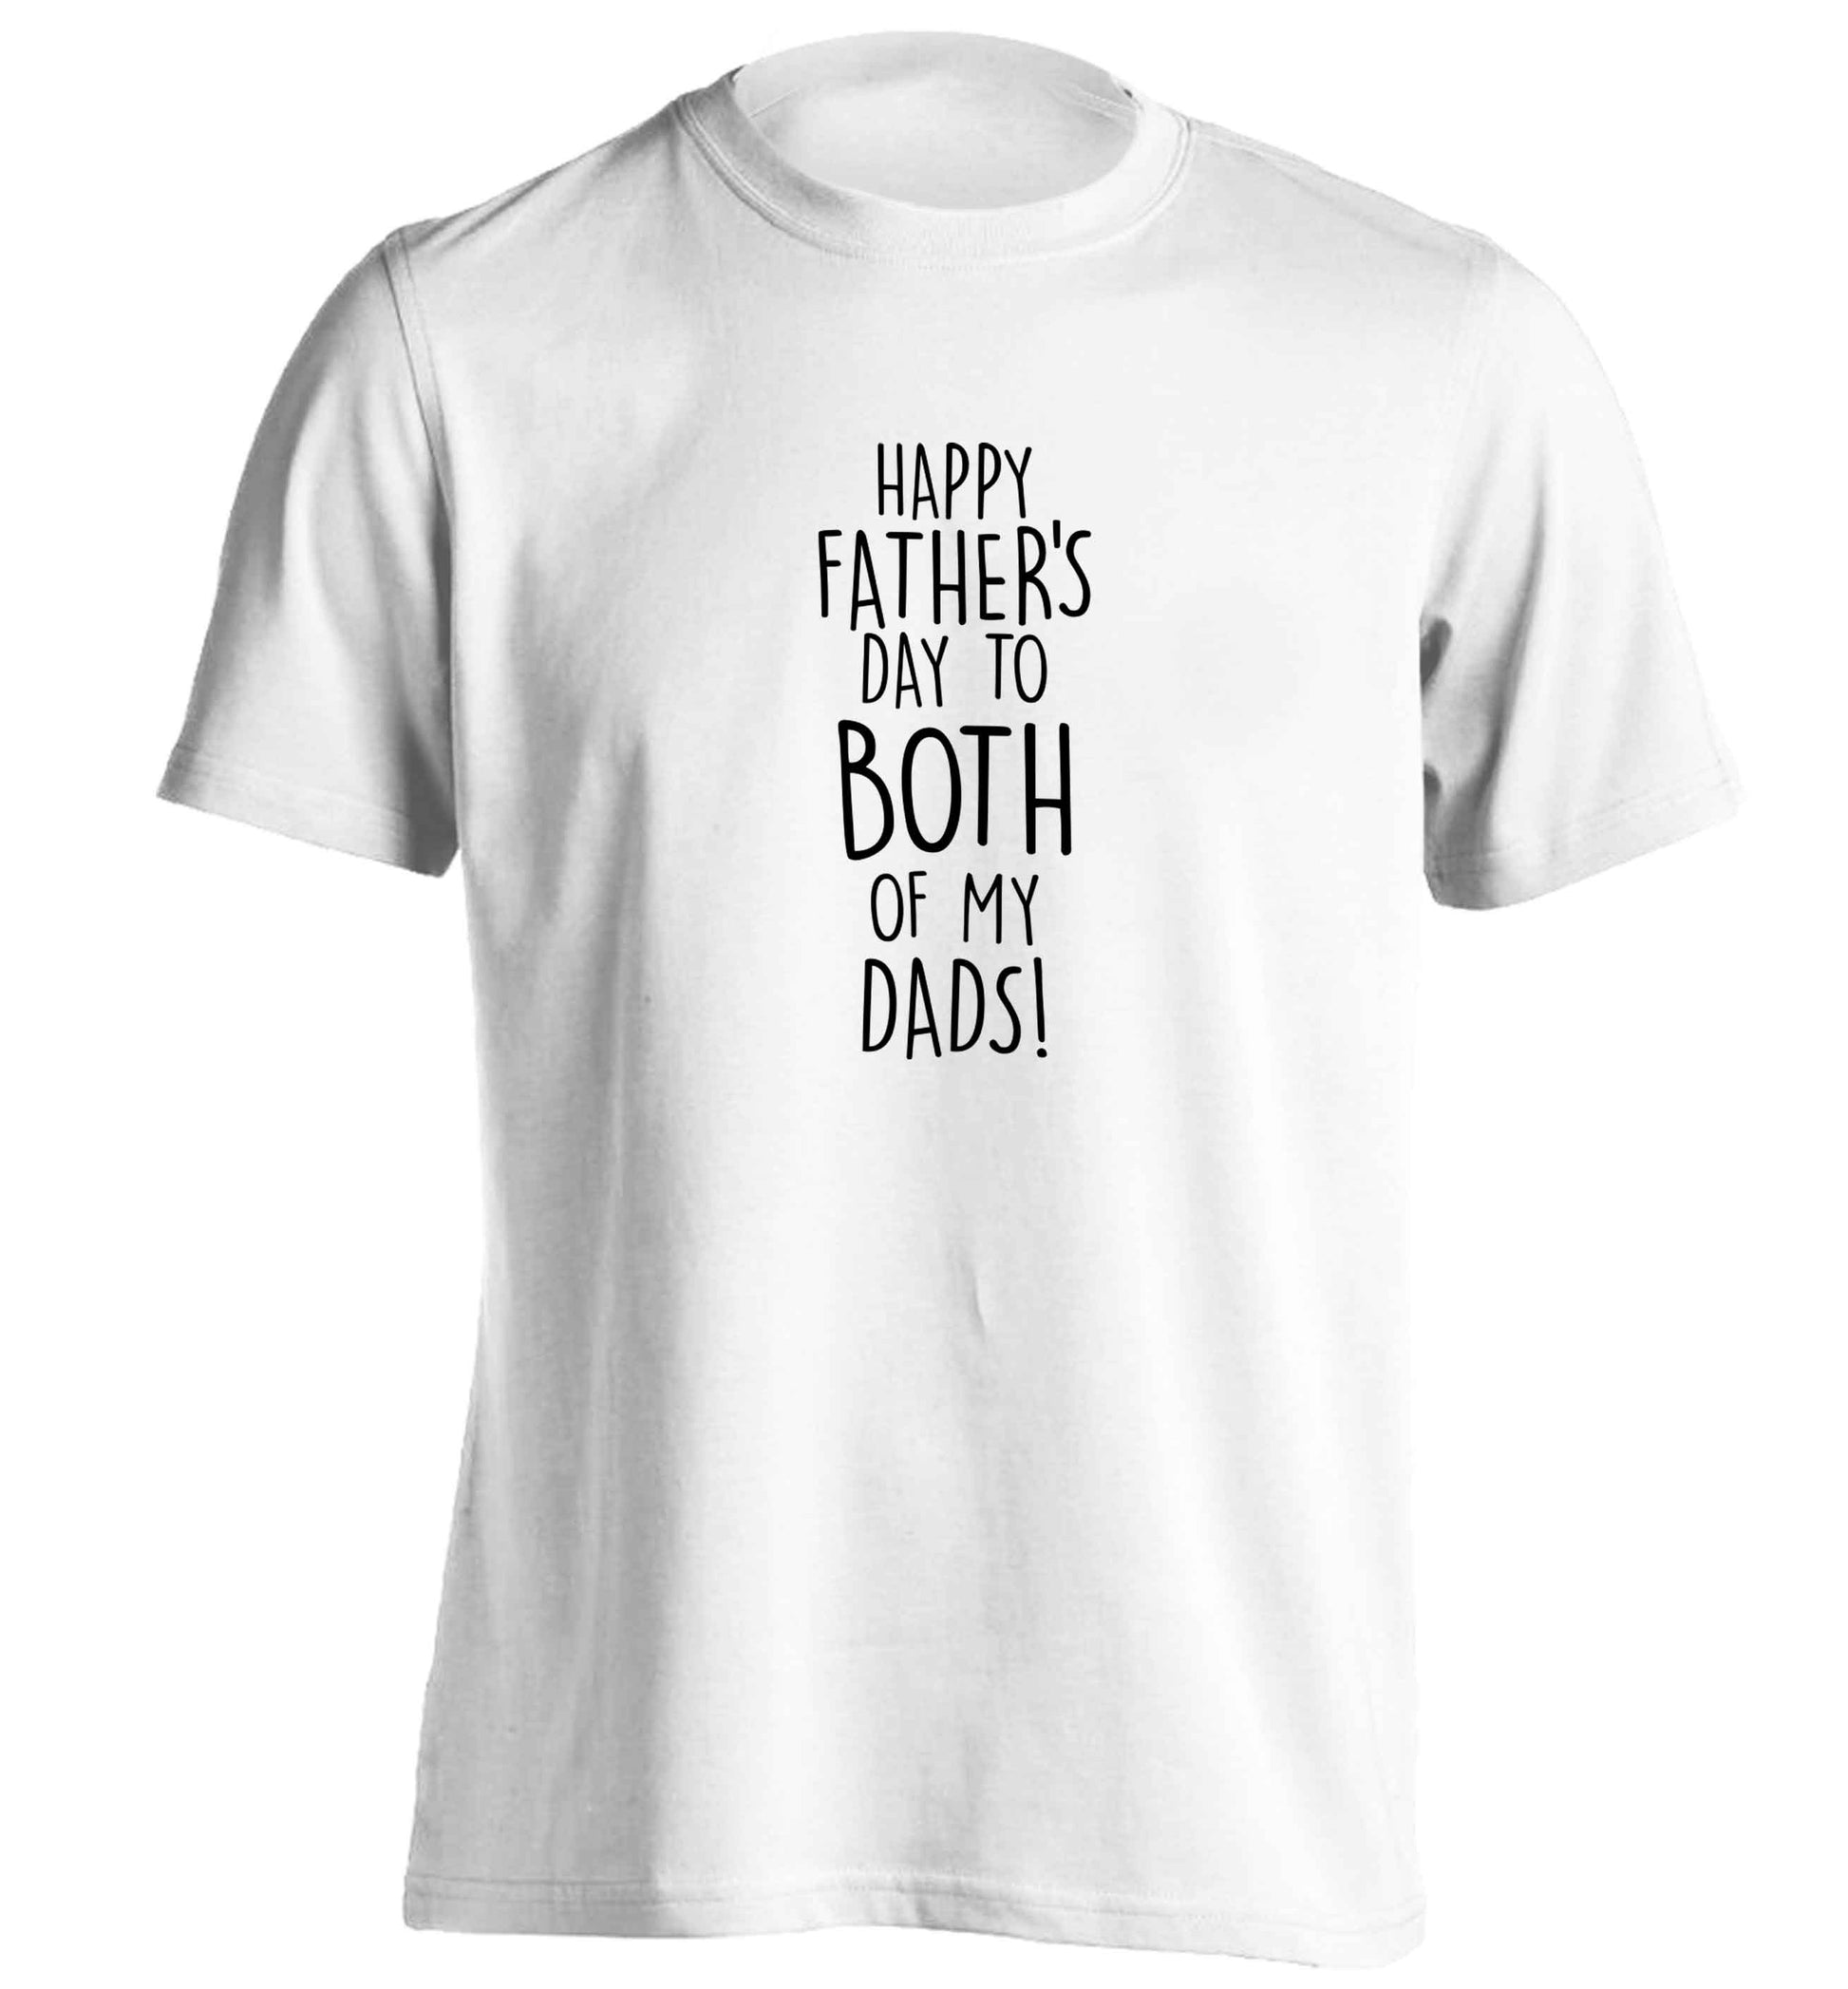 Happy Father's day to both of my dads adults unisex white Tshirt 2XL